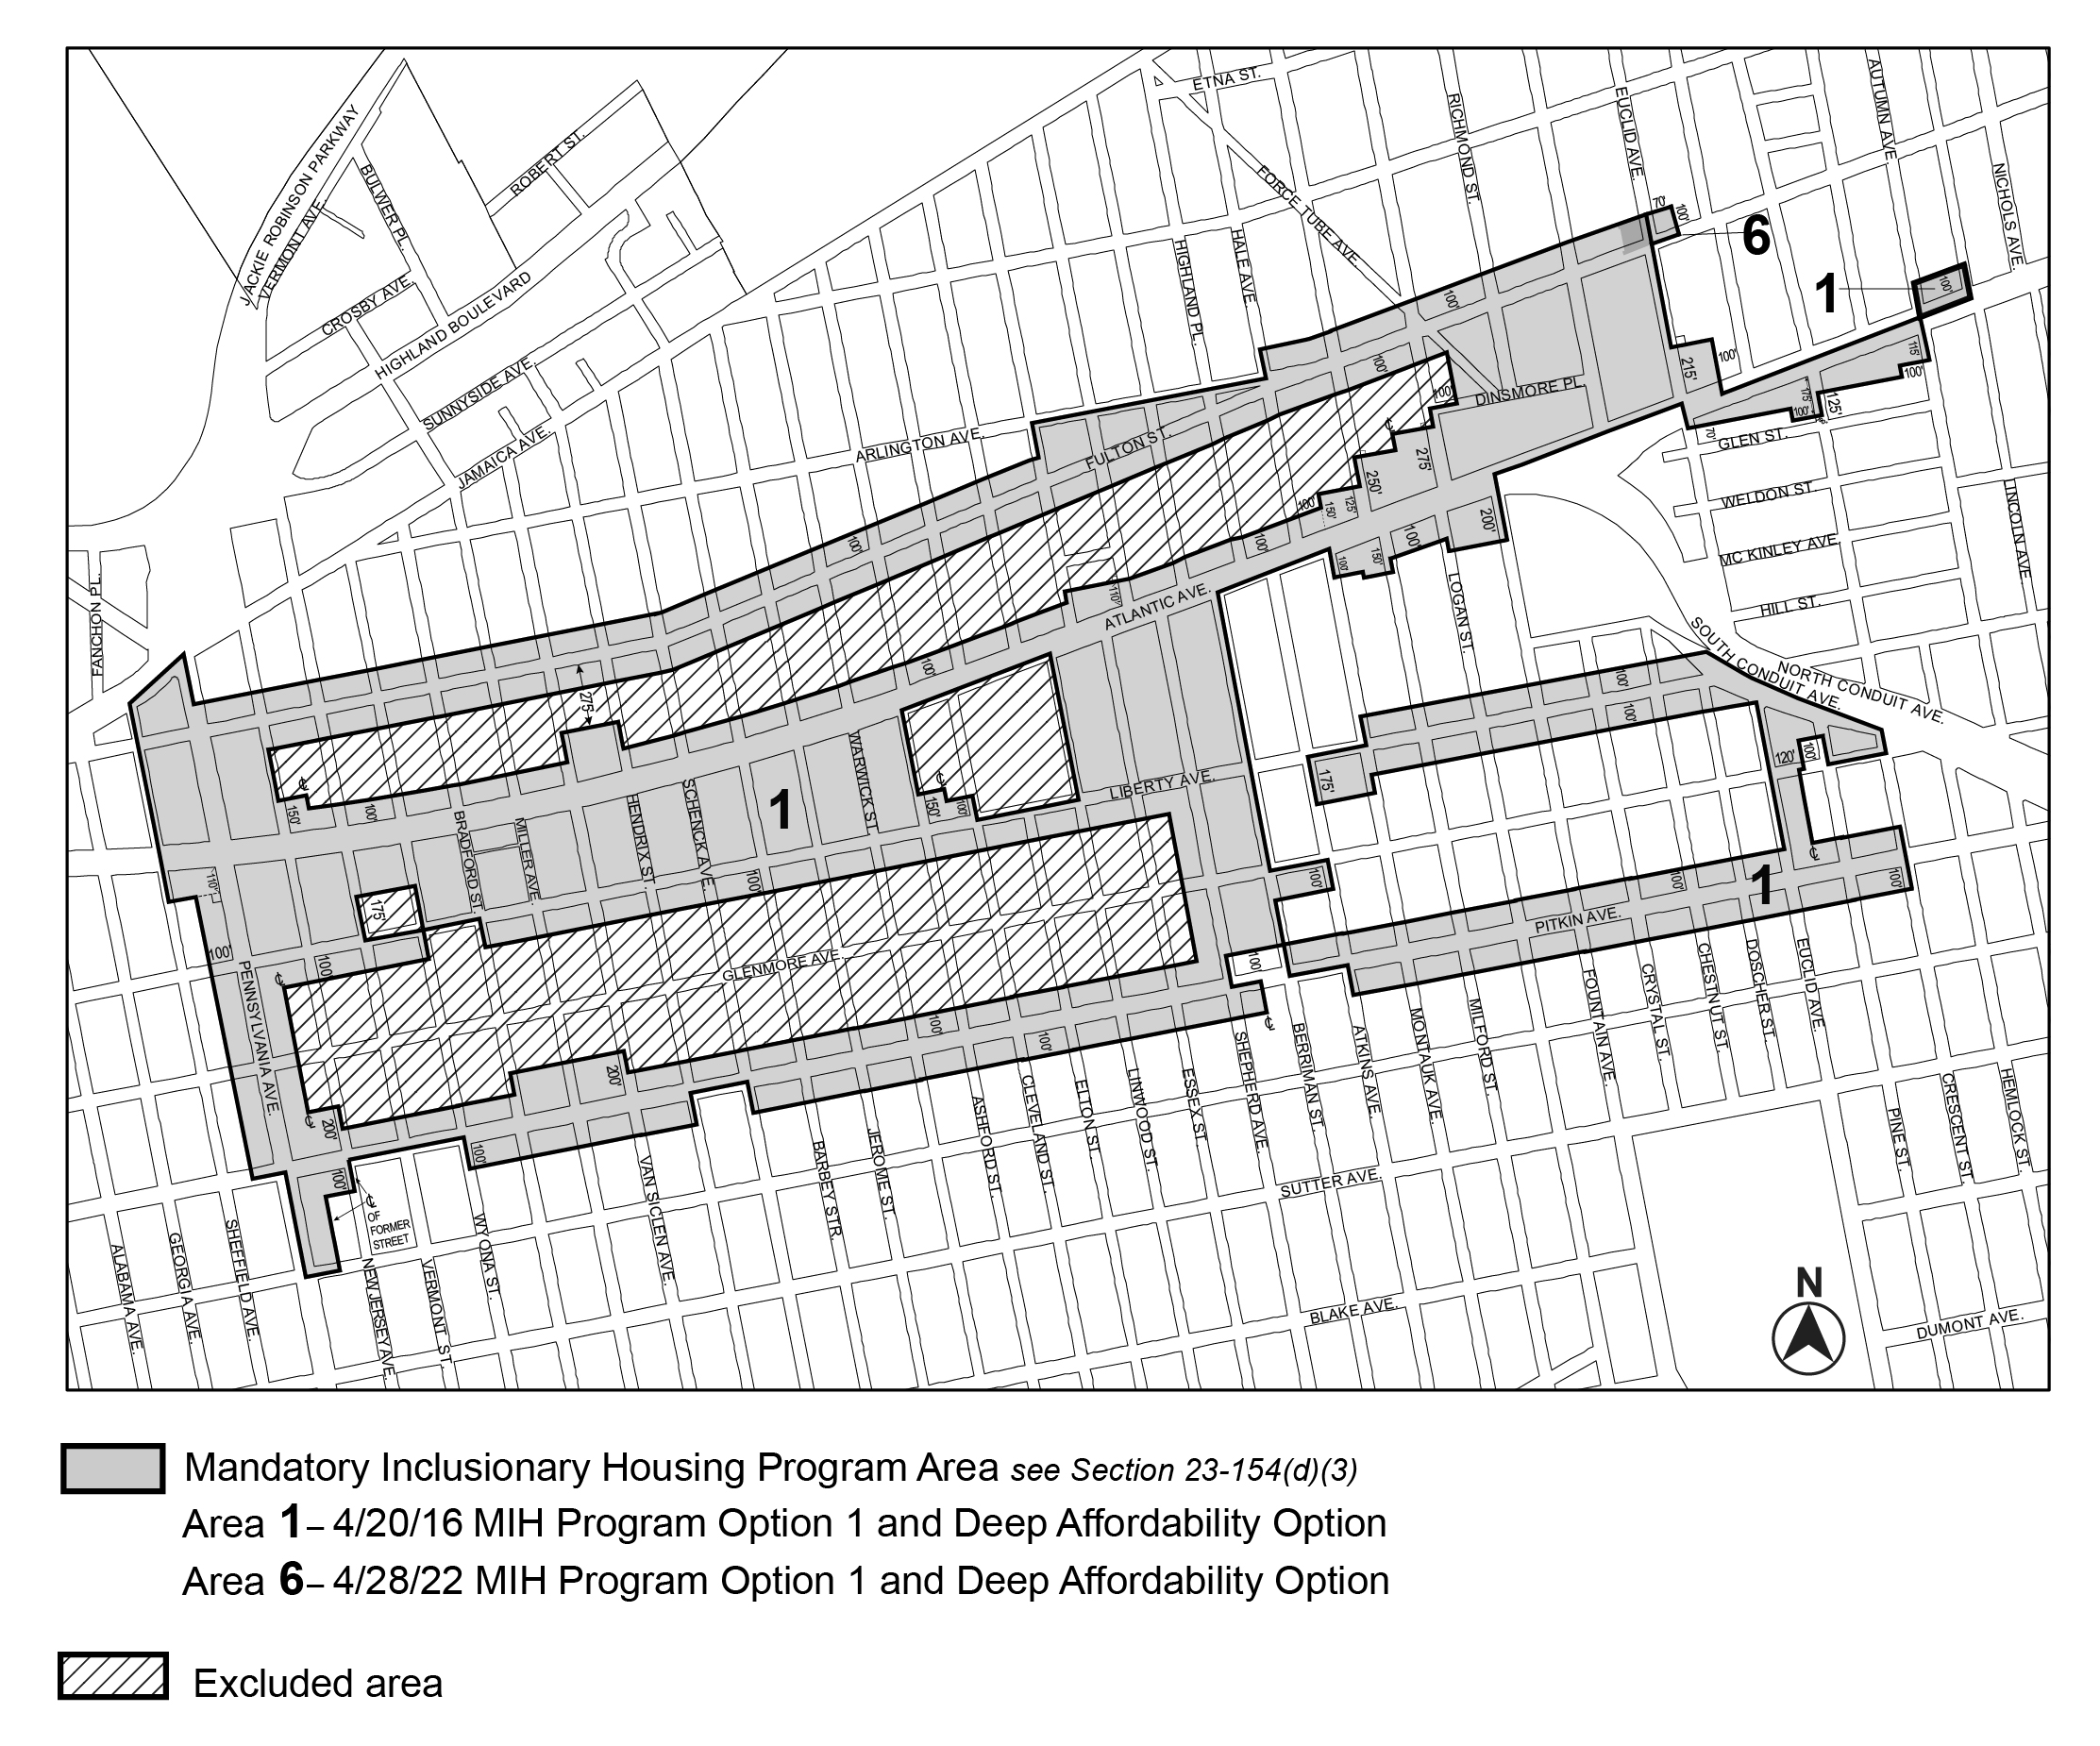 APPENDIX F, Brooklyn CD 5, Map 1, with Area 6 (Option 1, Deep Affordability Option) added per 3285 Fulton Street (N 220112 ZRK), adopted 28 April 2022